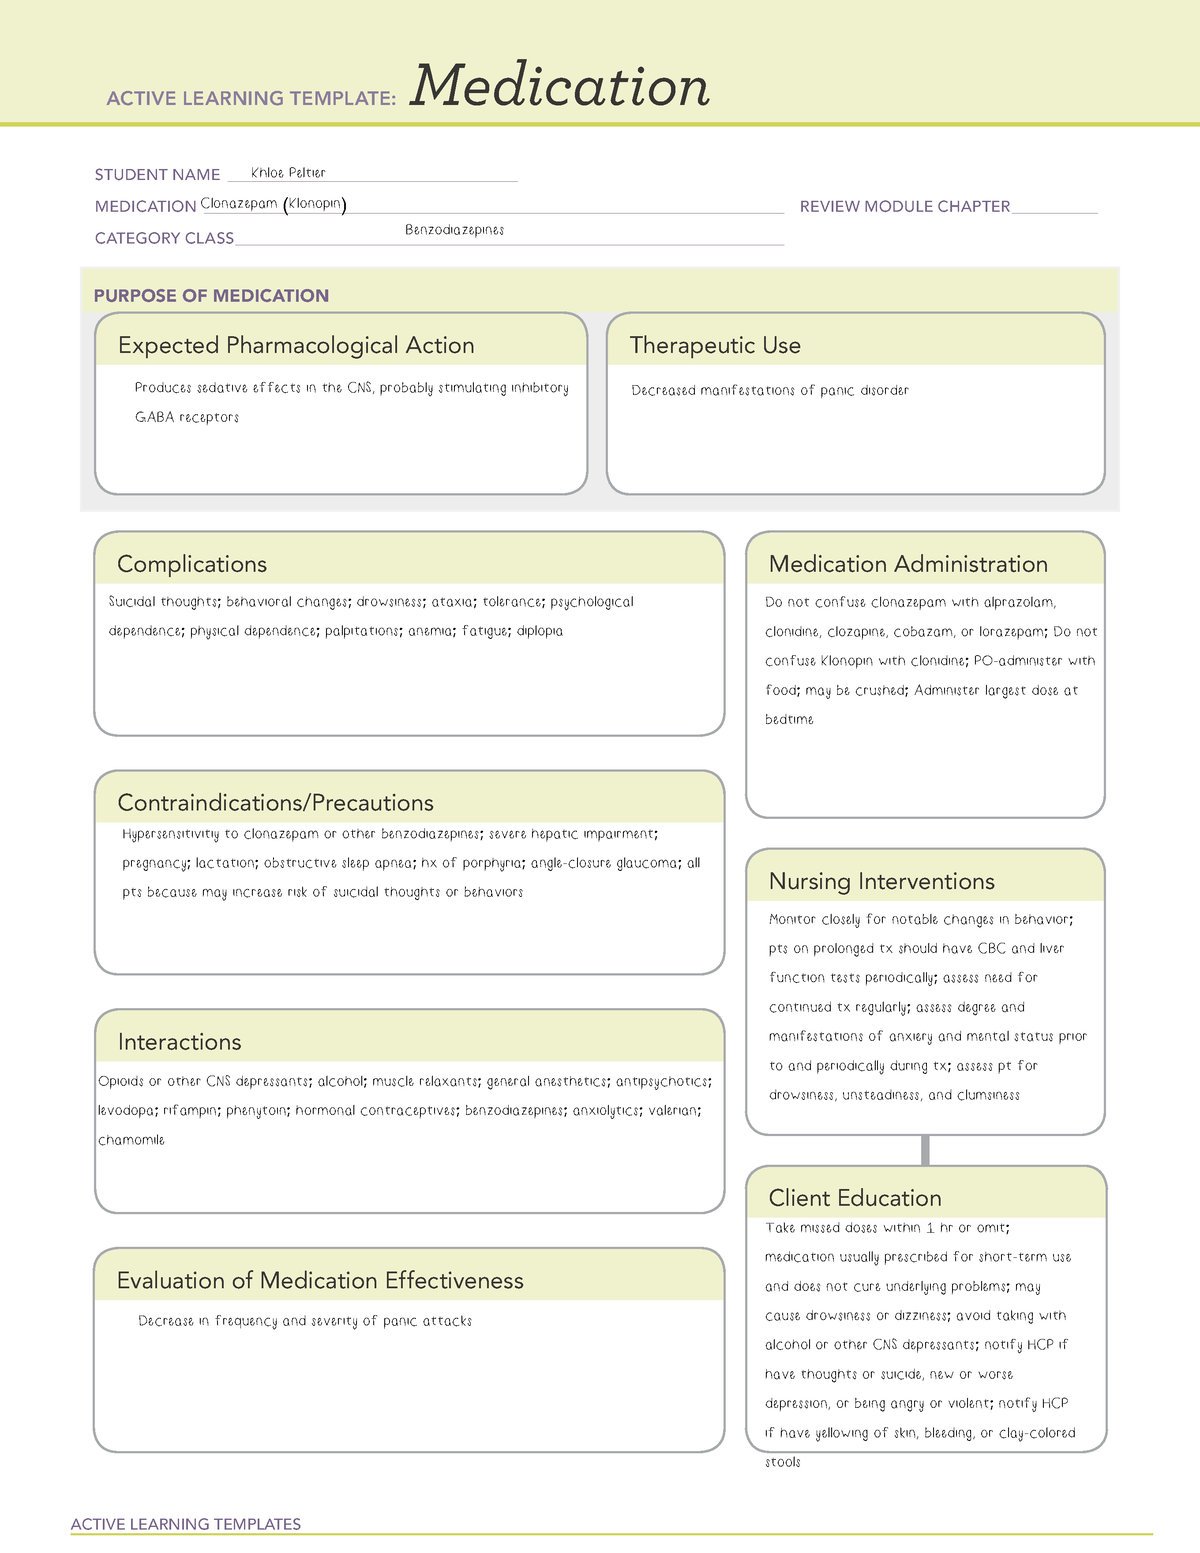 Clonazepam Medication Card ACTIVE LEARNING TEMPLATES Medication